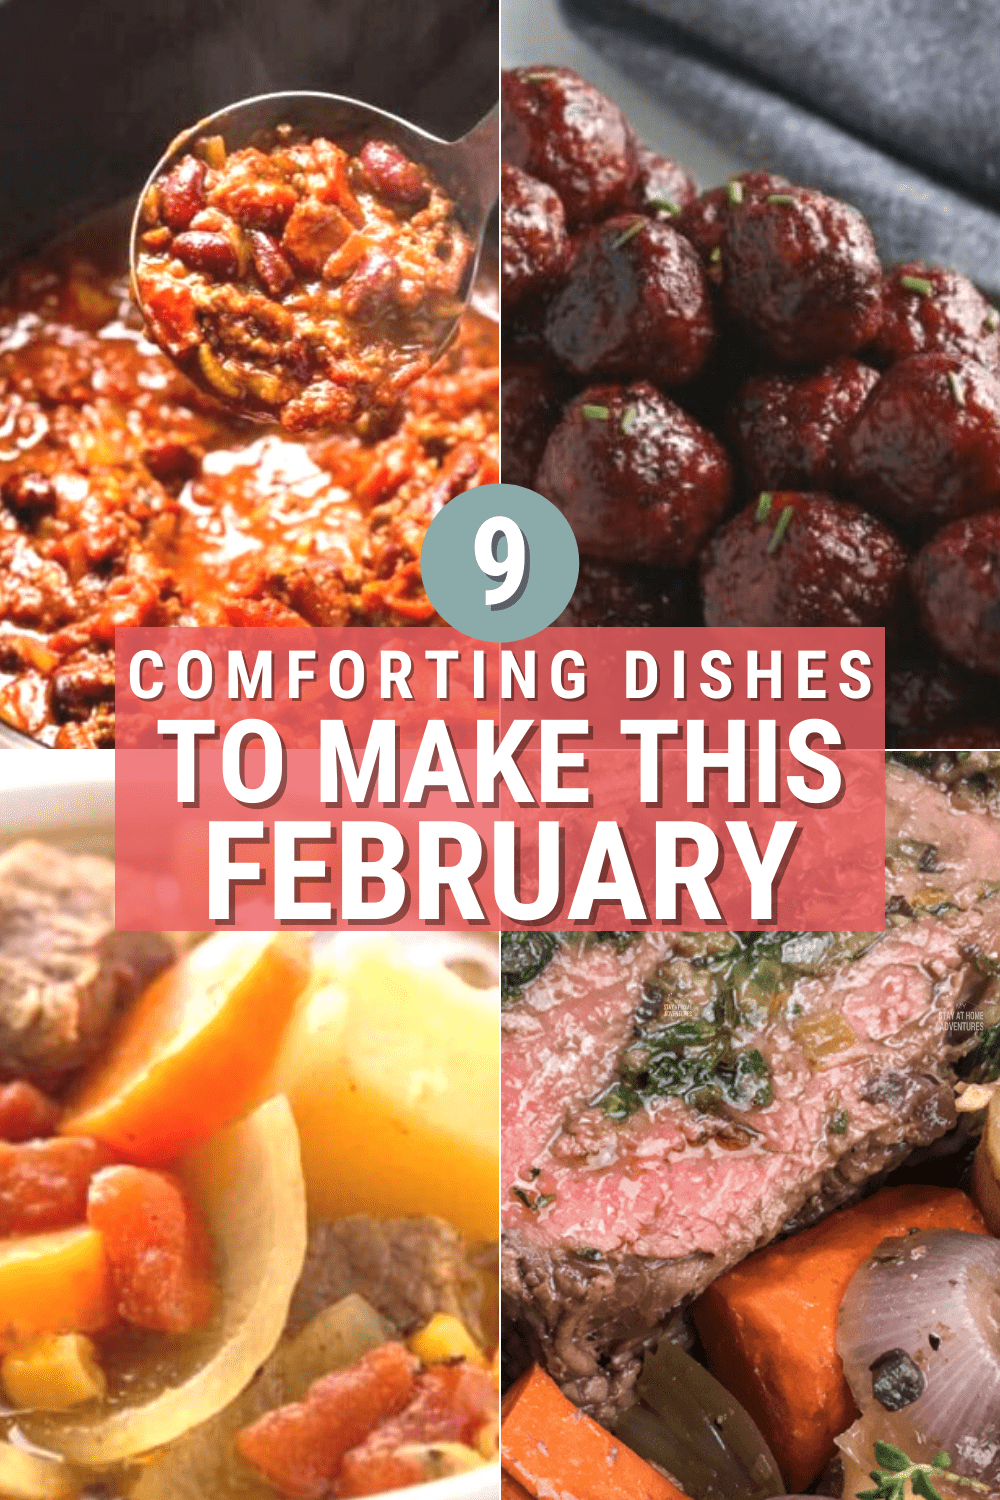 It's February, and that means it's time to start thinking about some delicious recipes to cook up this month! We've got many recipe ideas, from savory dishes to sweet treats. via @mystayathome